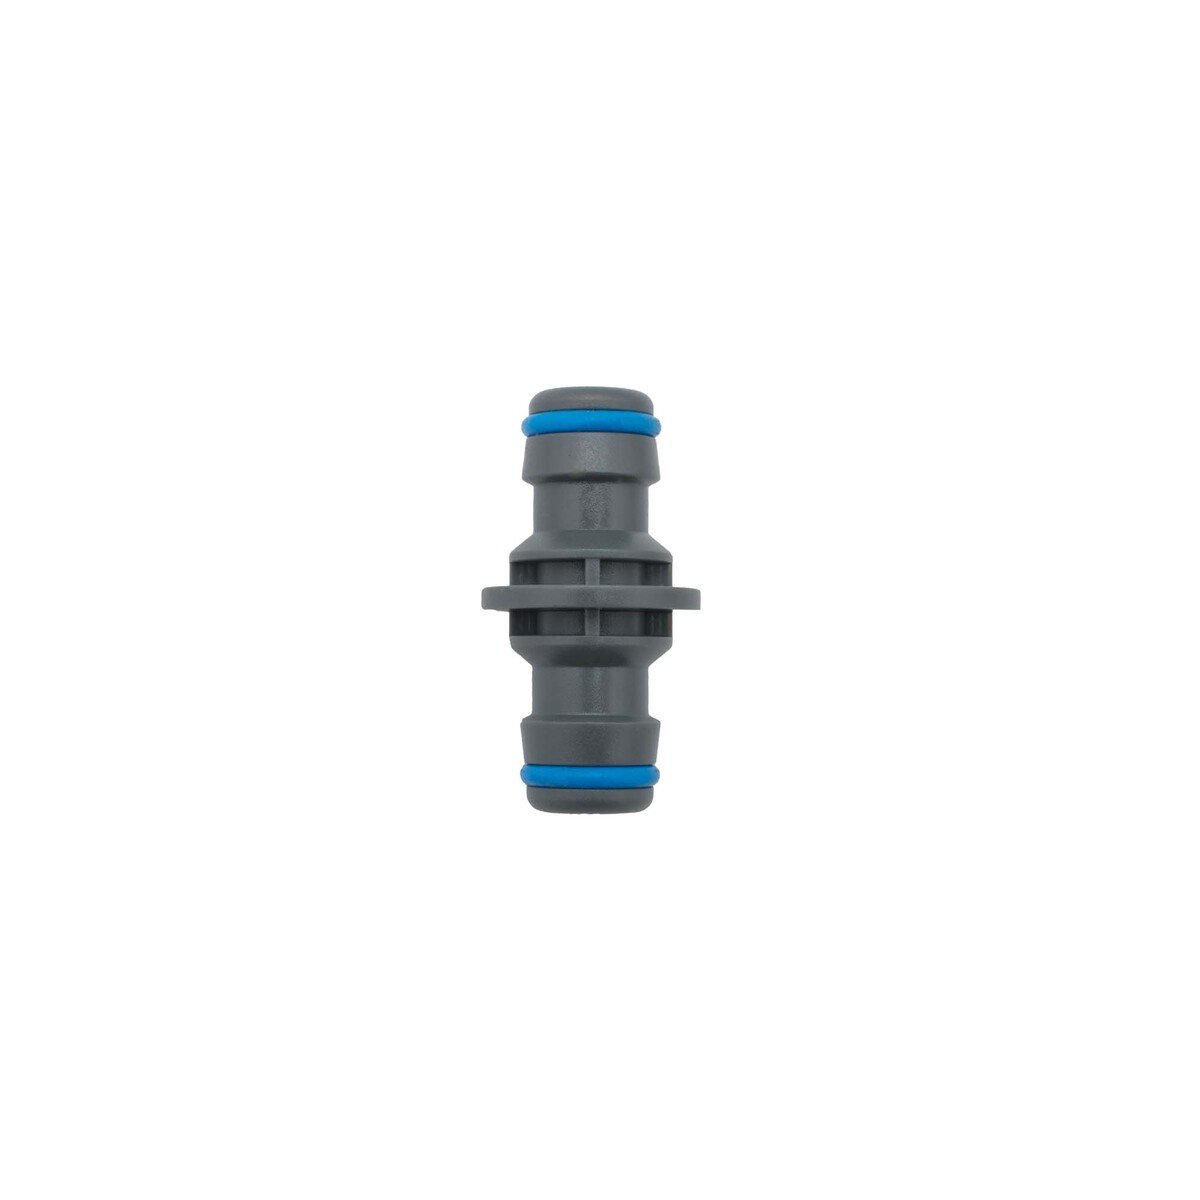 Aquacraft Standard Two-Way Hose Connector, Blue, 550210